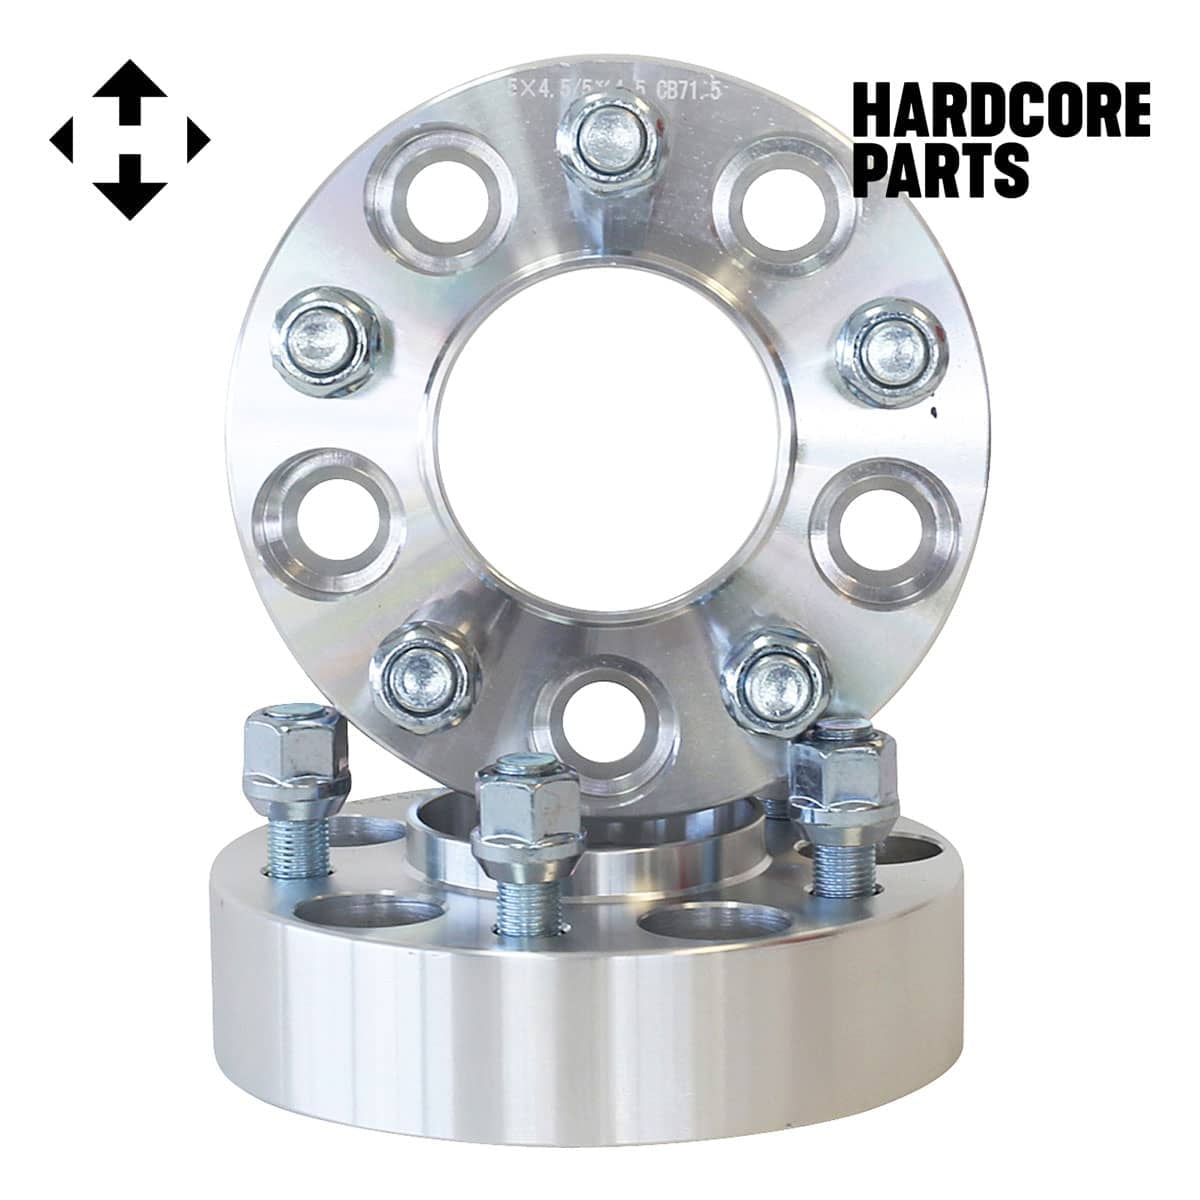 SCITOO 2X 5 Lug Wheel spacers Adapters 1.5 inch 5x4.5 to 5x5 1/2 71.5mm Compatible with for Jeep Liberty for Jeep Wrangler 